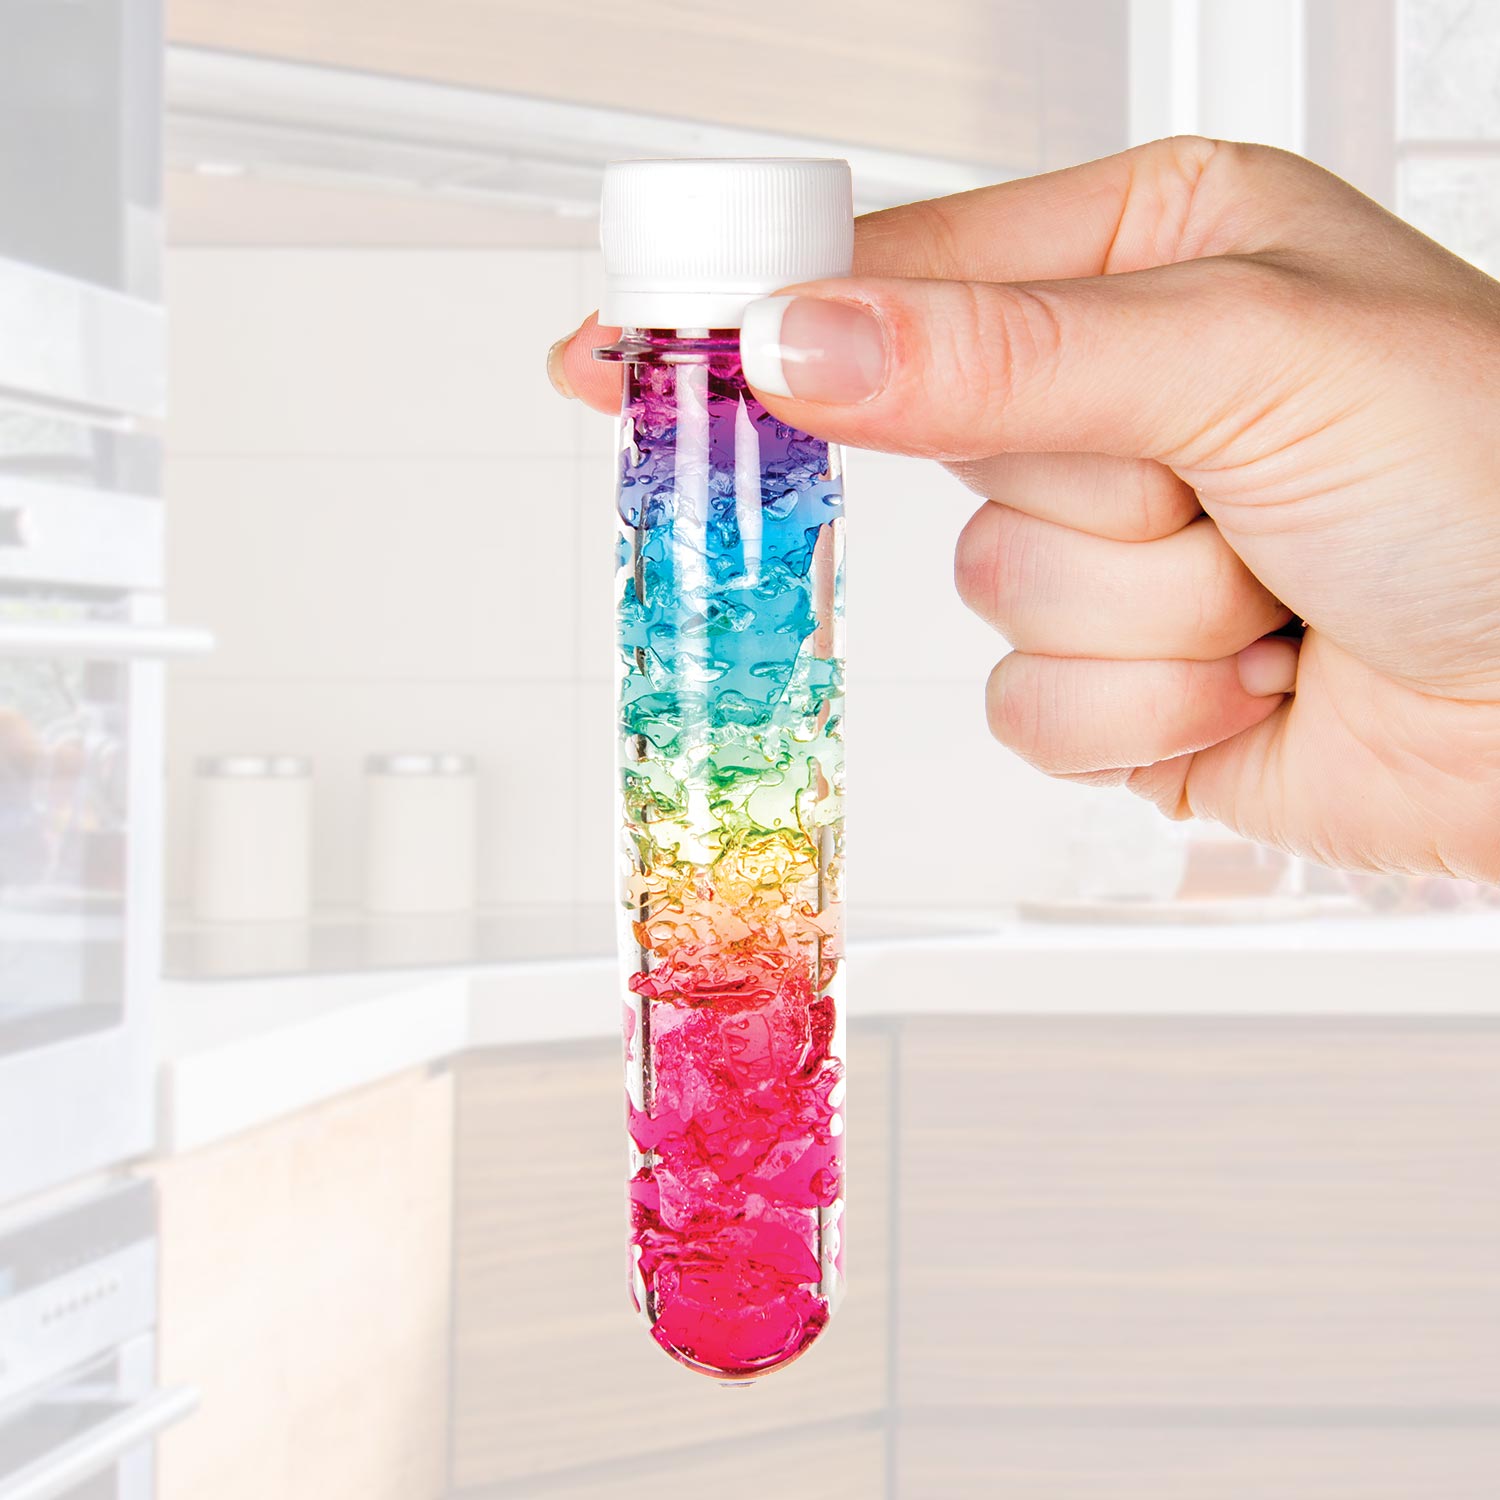 Details about   Steve Spangler's science experiment in a test tube Polymer Spikes new in tube. 